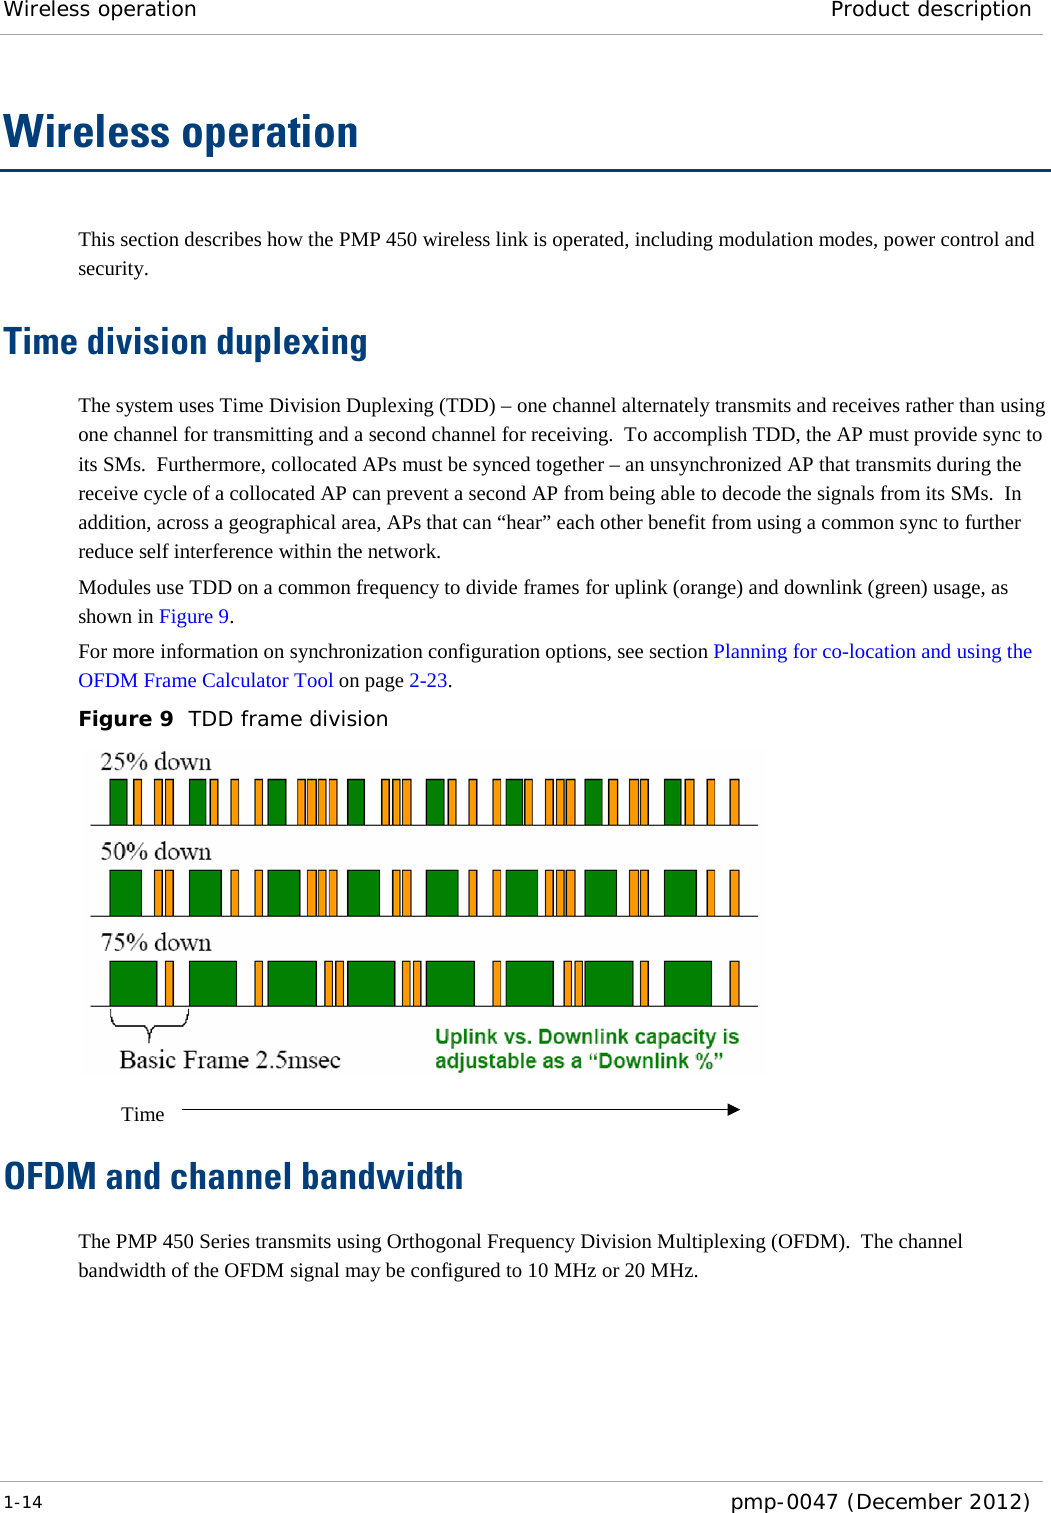 Wireless operation Product description  1-14  pmp-0047 (December 2012)  Wireless operation This section describes how the PMP 450 wireless link is operated, including modulation modes, power control and security. Time division duplexing The system uses Time Division Duplexing (TDD) – one channel alternately transmits and receives rather than using one channel for transmitting and a second channel for receiving.  To accomplish TDD, the AP must provide sync to its SMs.  Furthermore, collocated APs must be synced together – an unsynchronized AP that transmits during the receive cycle of a collocated AP can prevent a second AP from being able to decode the signals from its SMs.  In addition, across a geographical area, APs that can “hear” each other benefit from using a common sync to further reduce self interference within the network. Modules use TDD on a common frequency to divide frames for uplink (orange) and downlink (green) usage, as shown in Figure 9. For more information on synchronization configuration options, see section Planning for co-location and using the OFDM Frame Calculator Tool on page 2-23. Figure 9  TDD frame division   OFDM and channel bandwidth The PMP 450 Series transmits using Orthogonal Frequency Division Multiplexing (OFDM).  The channel bandwidth of the OFDM signal may be configured to 10 MHz or 20 MHz.    Time 